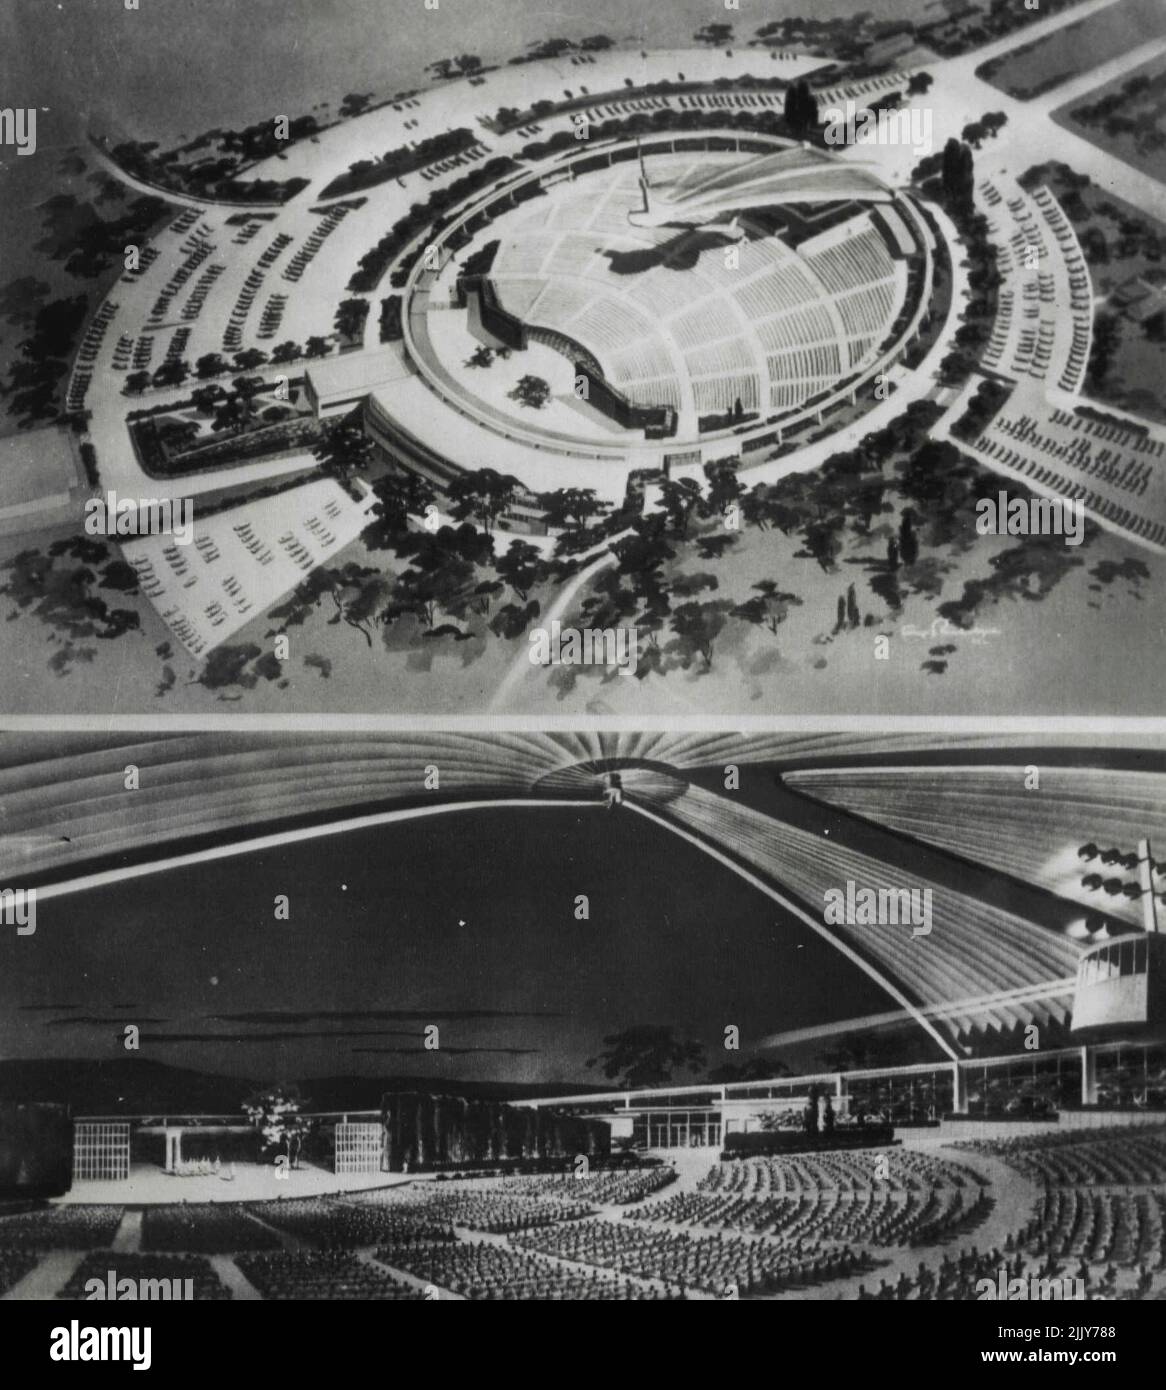 roof, divided into pie-shaped segment, is supported on a small triangular section extending from rear of the arena to the center, with a mast rising from the end of the cantilever supporting connecting wire to each segment. An electric switch will start the roof sections fanning out (lower illustration) over the audience. The ends ride on tracks along the circular outer wall around the arena, providing complete coverage in two and a half minutes. The amphitheater, to cost $1,000,000 (M) will house Pittsburgh Civic Light Opera Association activities. December 19, 1949. (Photo by AP Wirephoto). Stock Photo